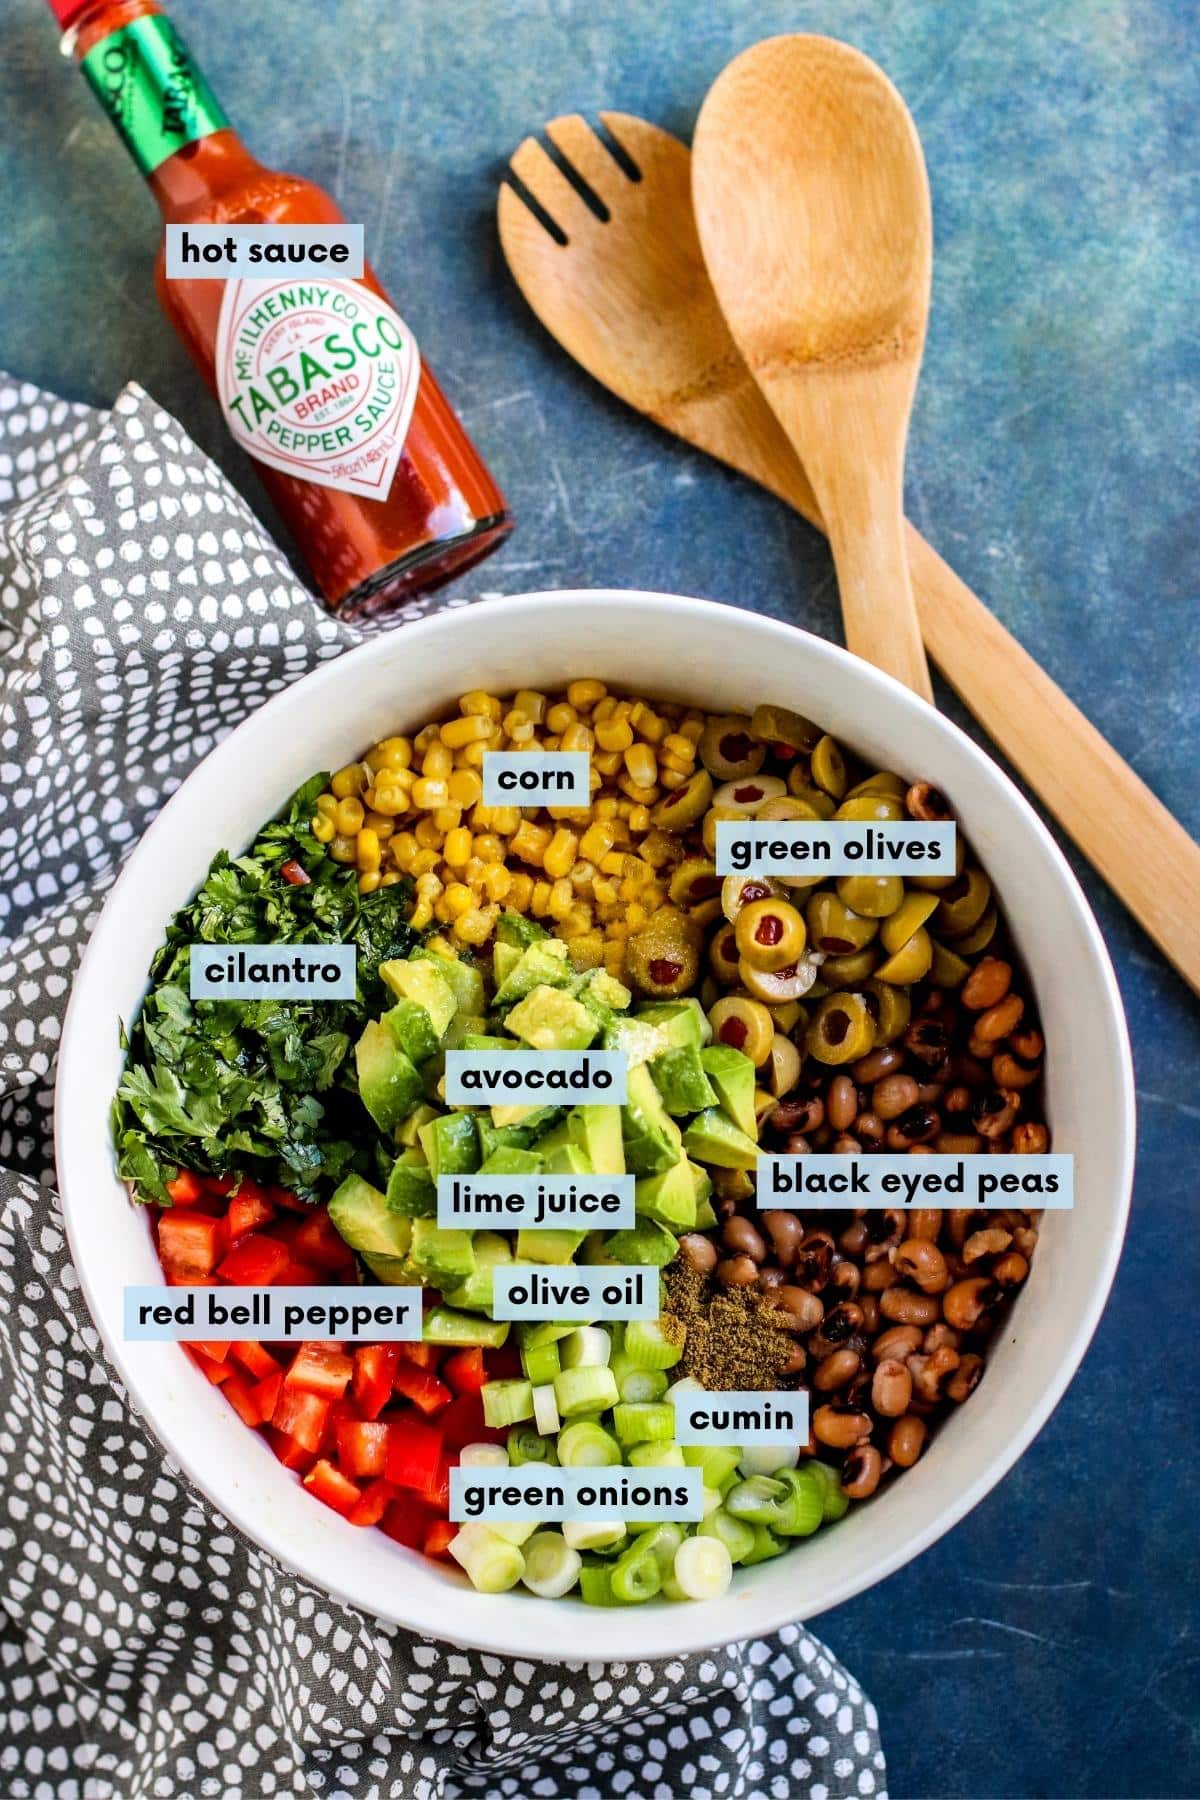 Bottle of hot sauce next to a large bowl with the dip ingredients in it and salad utensils on the side.